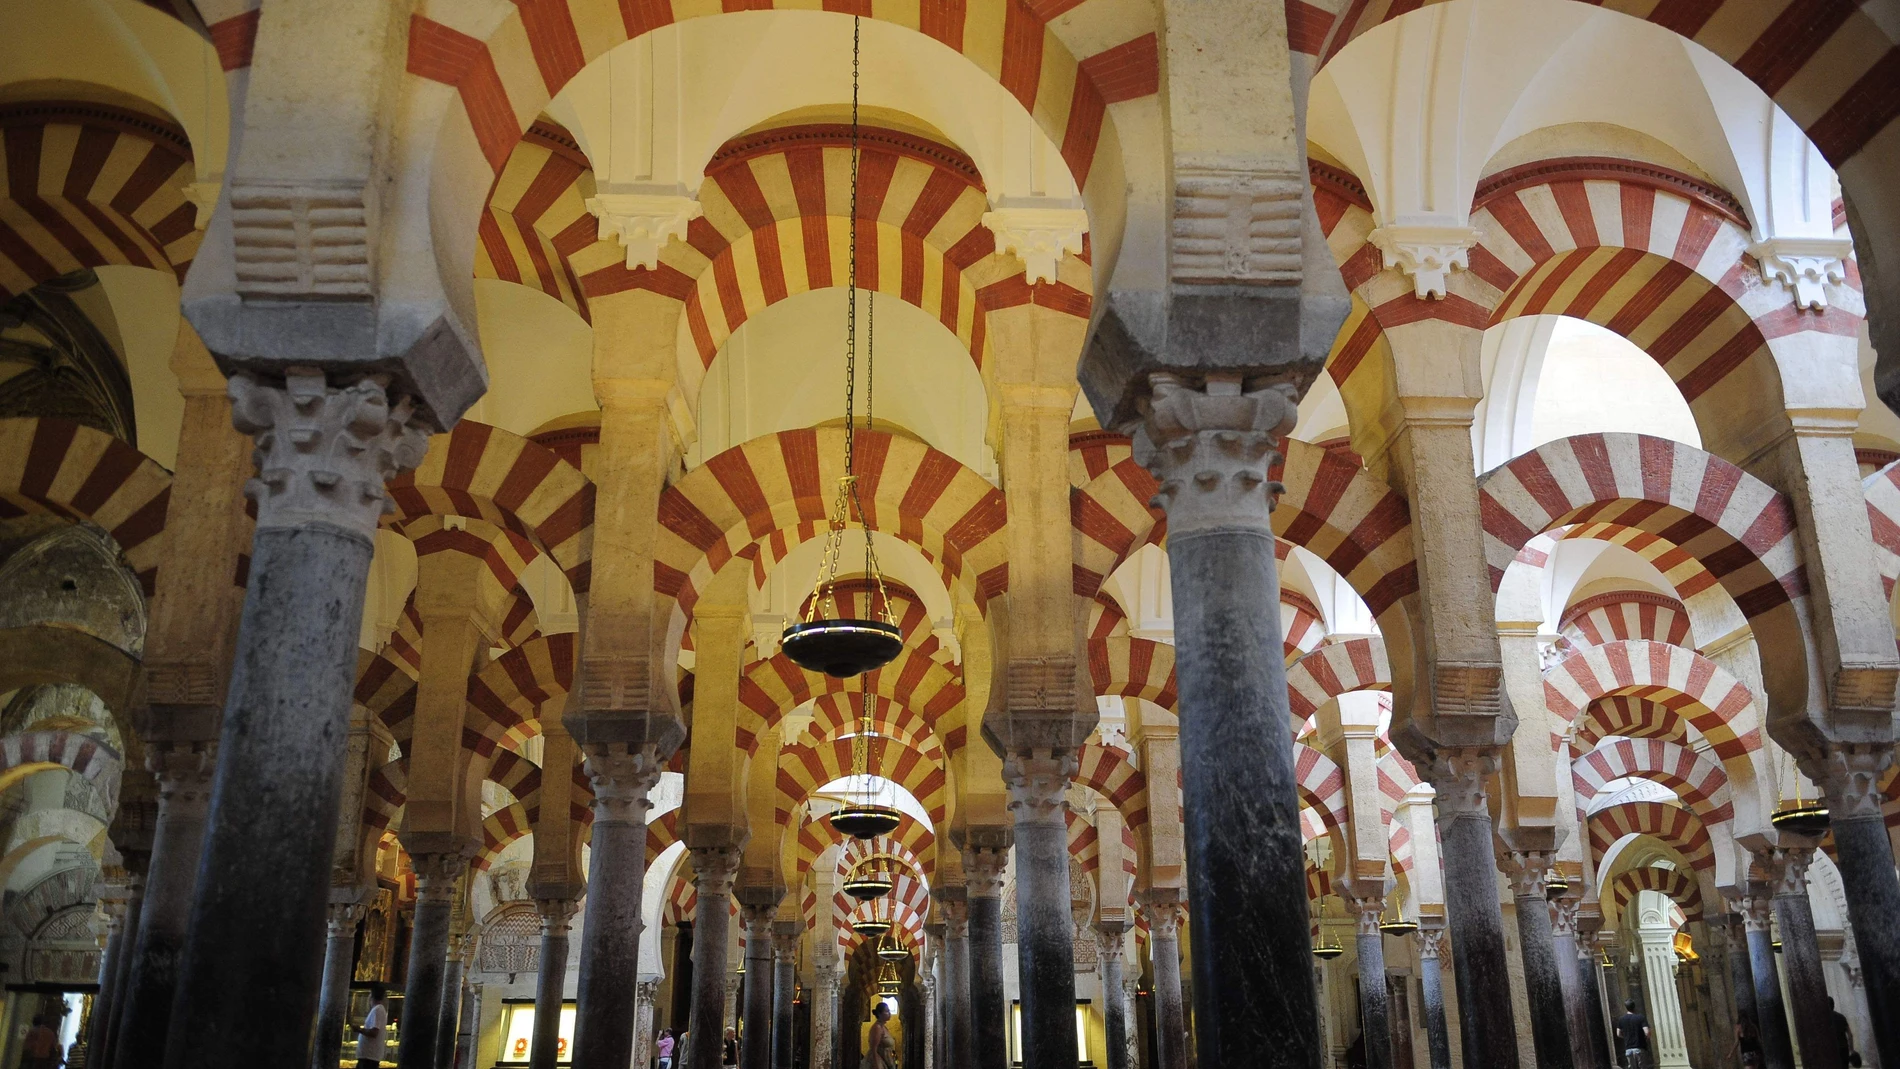 Tourists visit the Great Mosque of Cordoba in southern Spain, Thursday, Aug. 6, 2009. (AP Photo/Manu Fernandez)